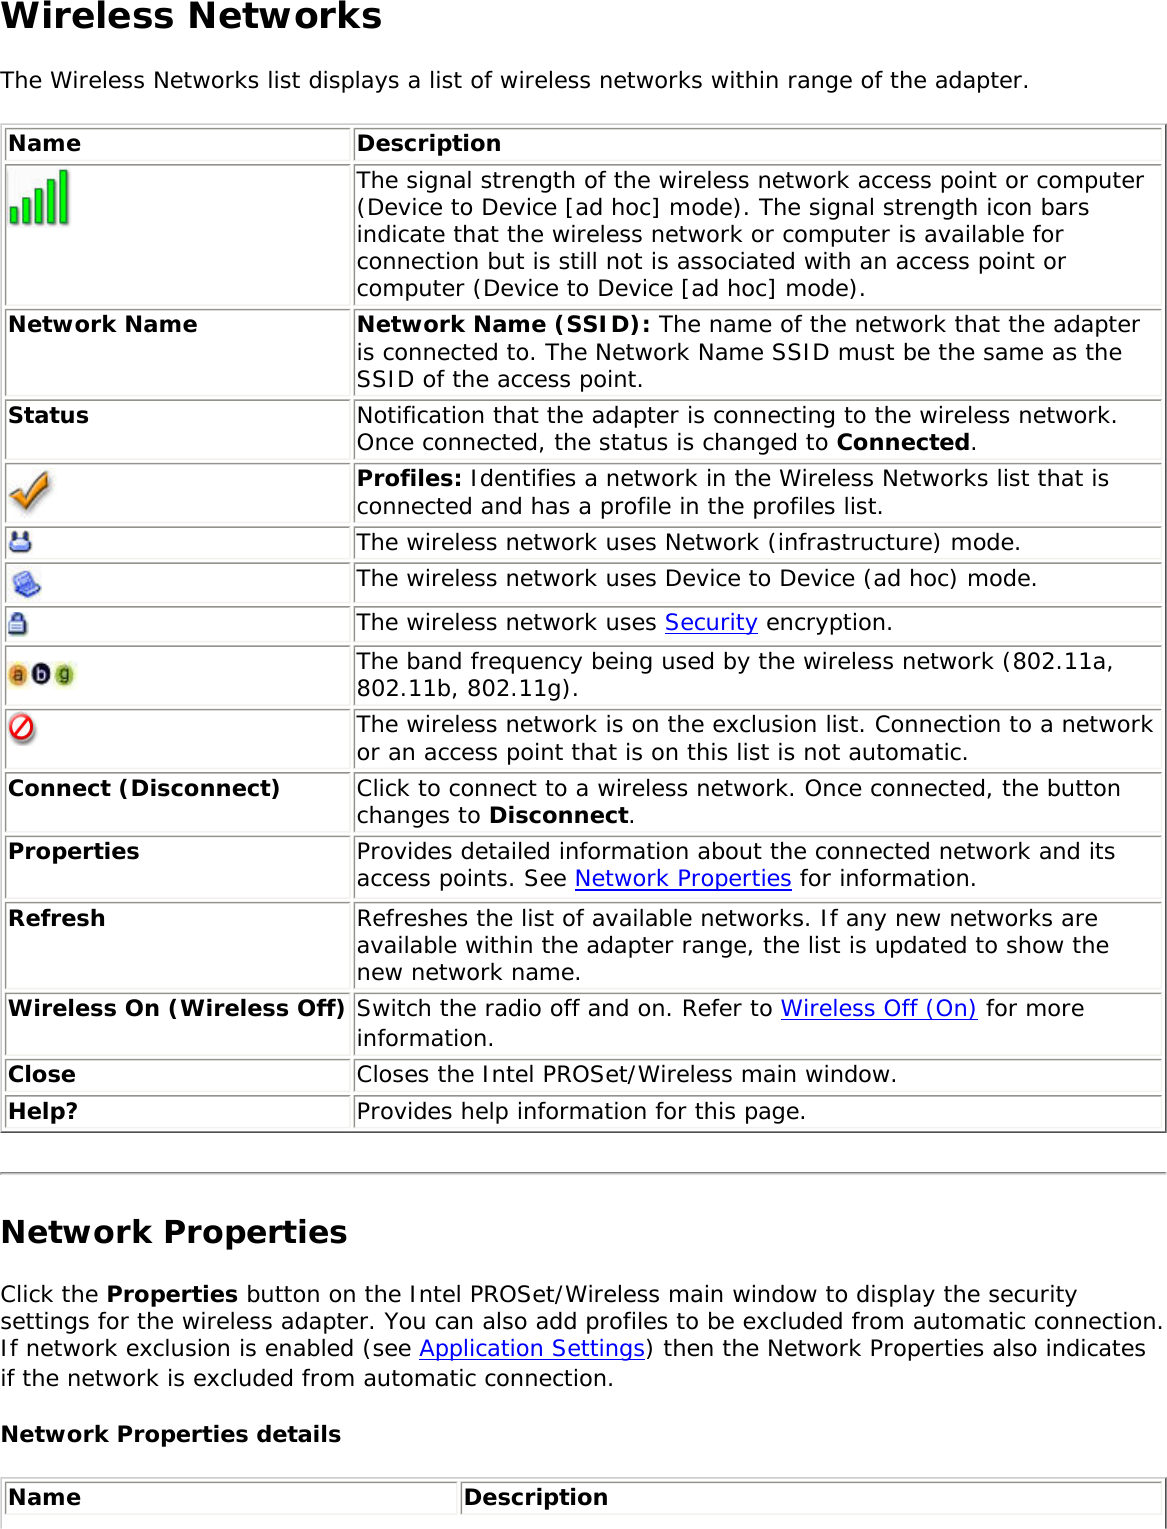 Wireless NetworksThe Wireless Networks list displays a list of wireless networks within range of the adapter. Name Description The signal strength of the wireless network access point or computer (Device to Device [ad hoc] mode). The signal strength icon bars indicate that the wireless network or computer is available for connection but is still not is associated with an access point or computer (Device to Device [ad hoc] mode).Network Name Network Name (SSID): The name of the network that the adapter is connected to. The Network Name SSID must be the same as the SSID of the access point.Status Notification that the adapter is connecting to the wireless network. Once connected, the status is changed to Connected. Profiles: Identifies a network in the Wireless Networks list that is connected and has a profile in the profiles list. The wireless network uses Network (infrastructure) mode. The wireless network uses Device to Device (ad hoc) mode.The wireless network uses Security encryption.The band frequency being used by the wireless network (802.11a, 802.11b, 802.11g).The wireless network is on the exclusion list. Connection to a network or an access point that is on this list is not automatic. Connect (Disconnect)  Click to connect to a wireless network. Once connected, the button changes to Disconnect.Properties Provides detailed information about the connected network and its access points. See Network Properties for information. Refresh  Refreshes the list of available networks. If any new networks are available within the adapter range, the list is updated to show the new network name.  Wireless On (Wireless Off) Switch the radio off and on. Refer to Wireless Off (On) for more information.Close Closes the Intel PROSet/Wireless main window.Help? Provides help information for this page. Network PropertiesClick the Properties button on the Intel PROSet/Wireless main window to display the security settings for the wireless adapter. You can also add profiles to be excluded from automatic connection. If network exclusion is enabled (see Application Settings) then the Network Properties also indicates if the network is excluded from automatic connection. Network Properties details Name Description